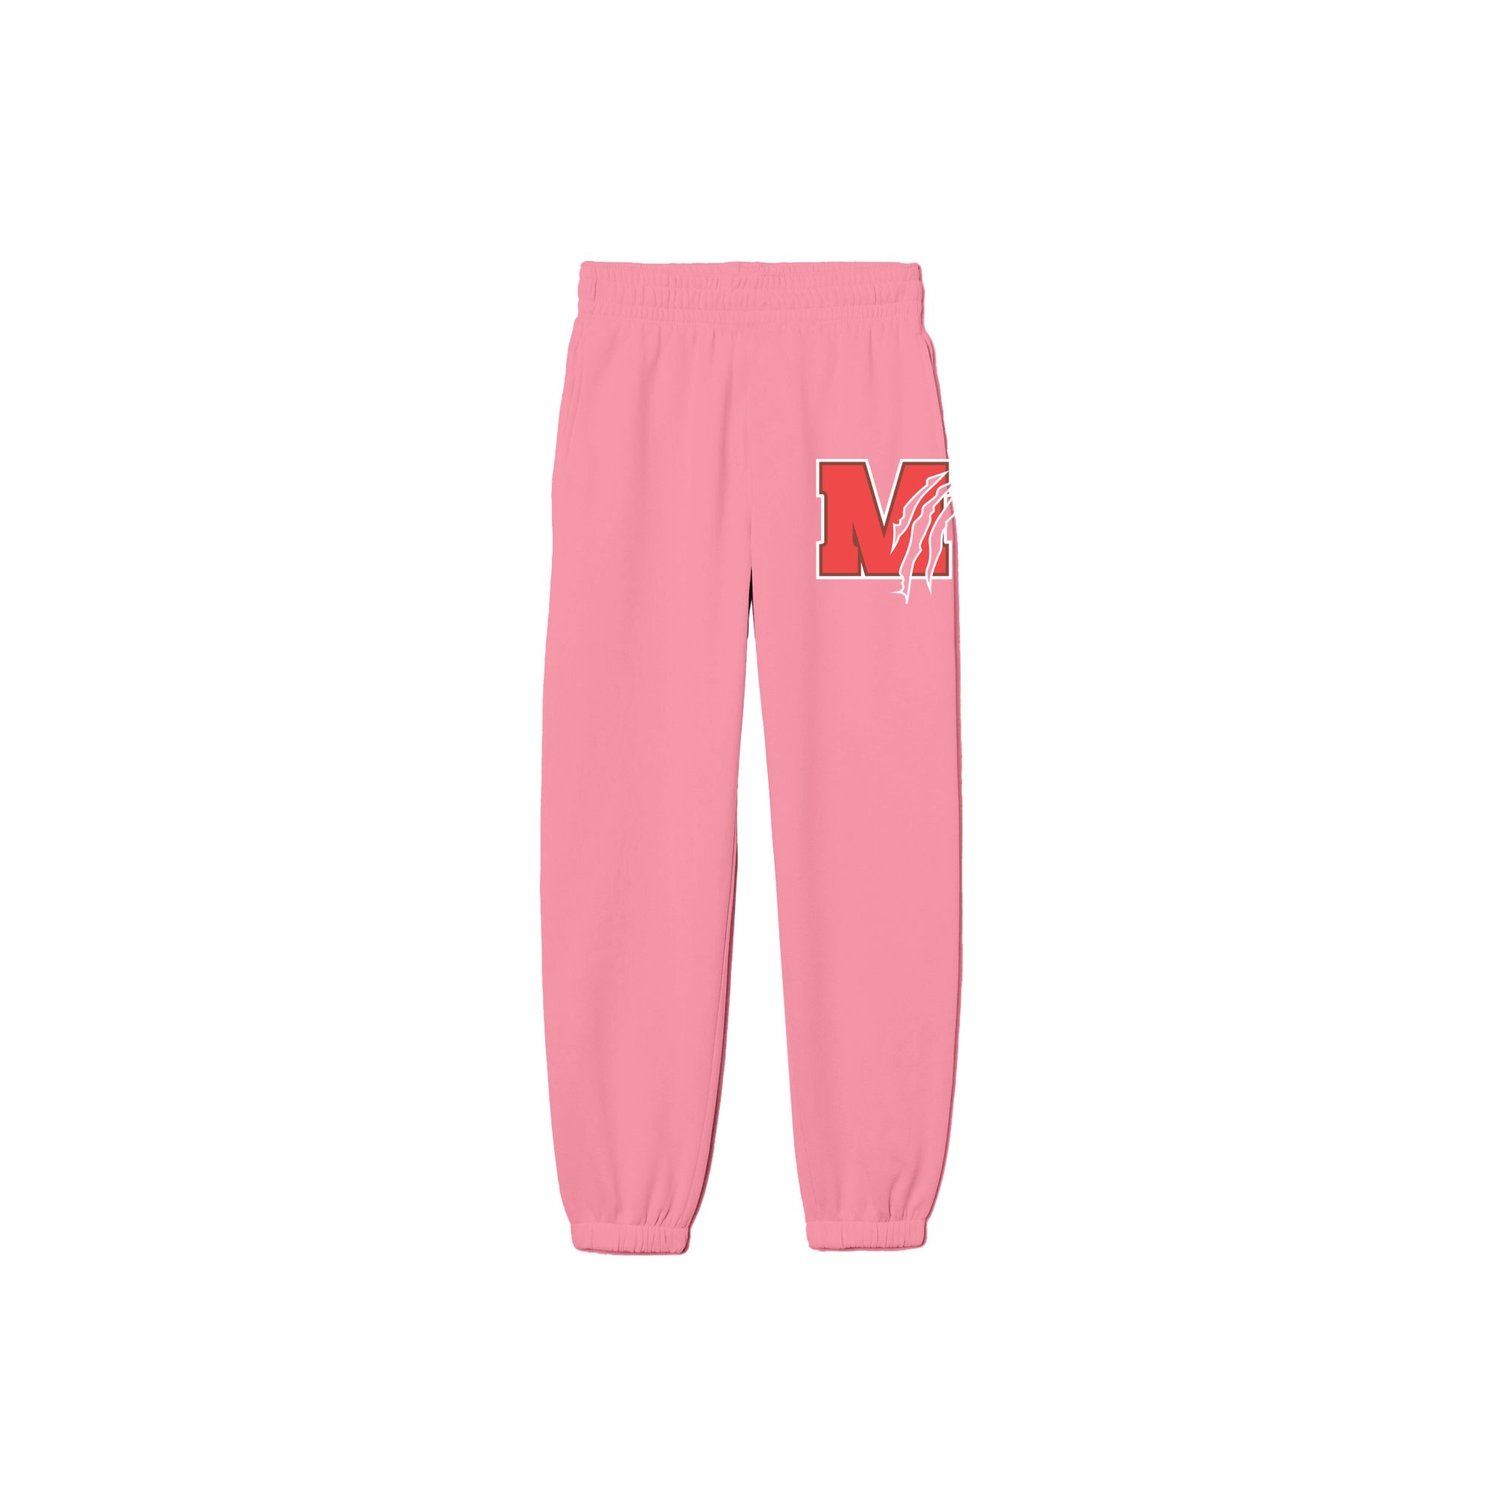 Nike sweatpants Pink Size M - $17 - From Lily